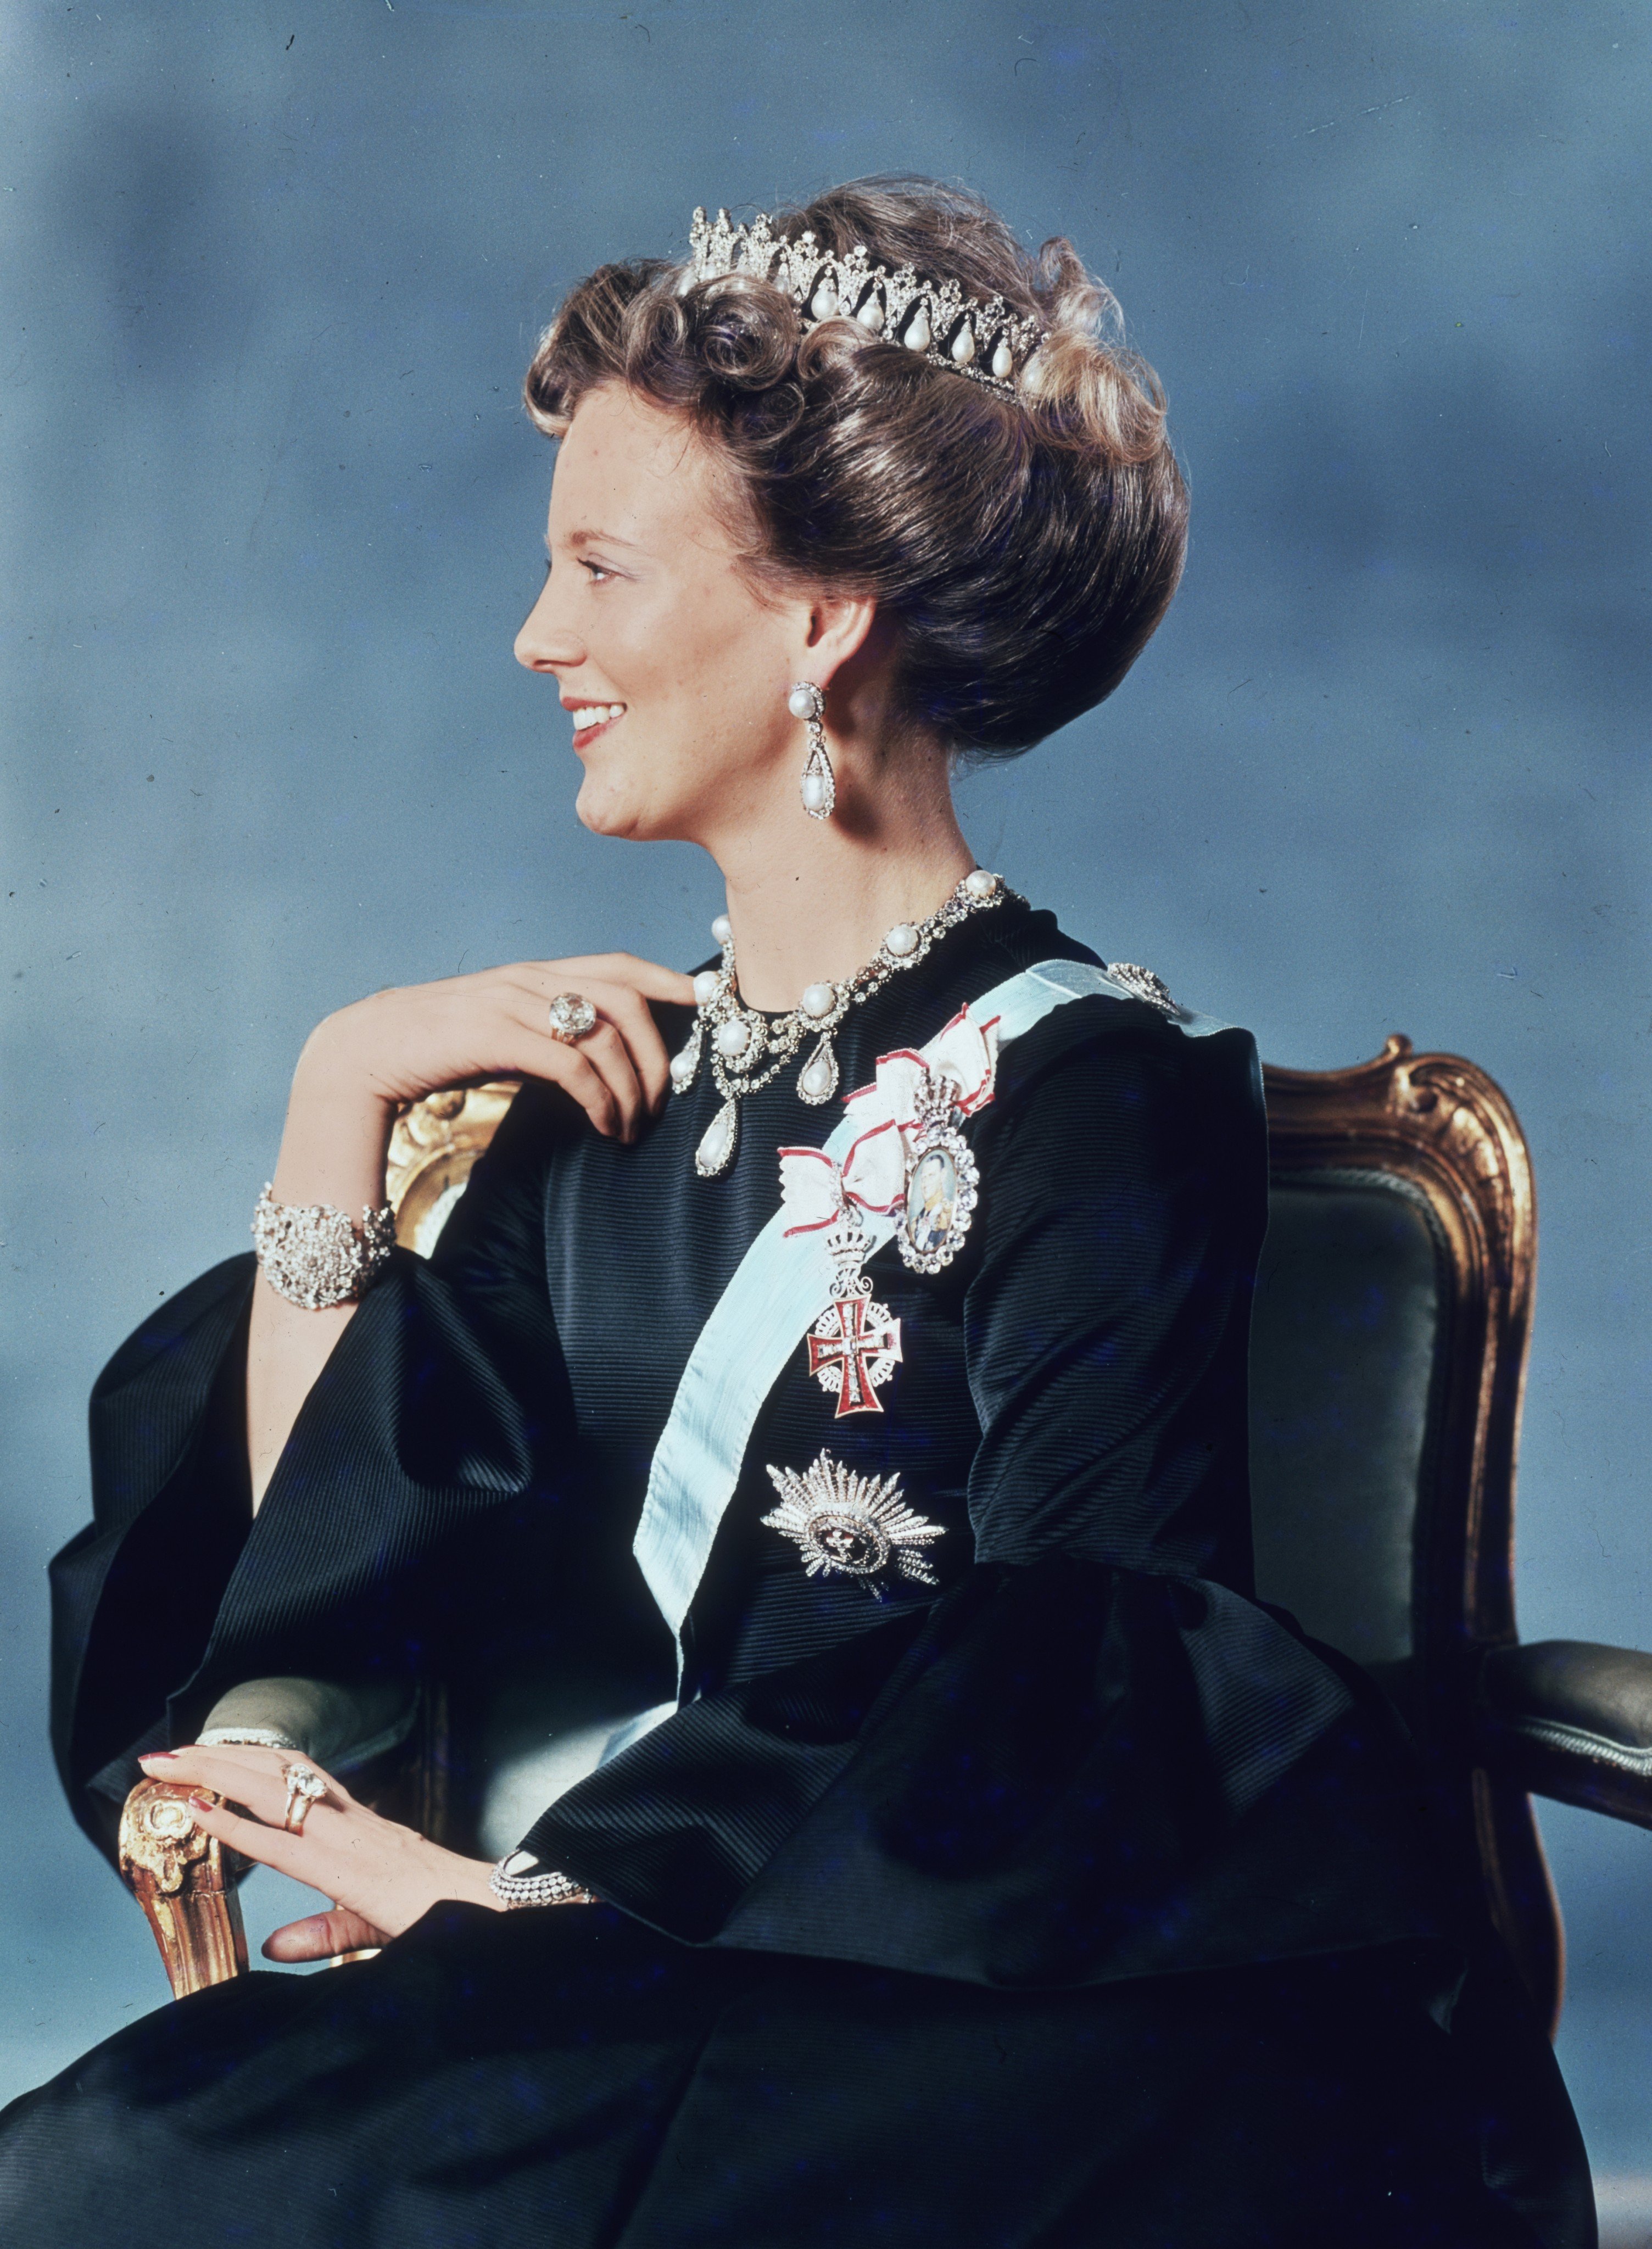 Denmark’s Margrethe II in her first official photograph as queen in 1972. There were some emperors in Chinese history who, like Margrethe, also abdicated, but sometimes it was forced. Photo: Getty Images